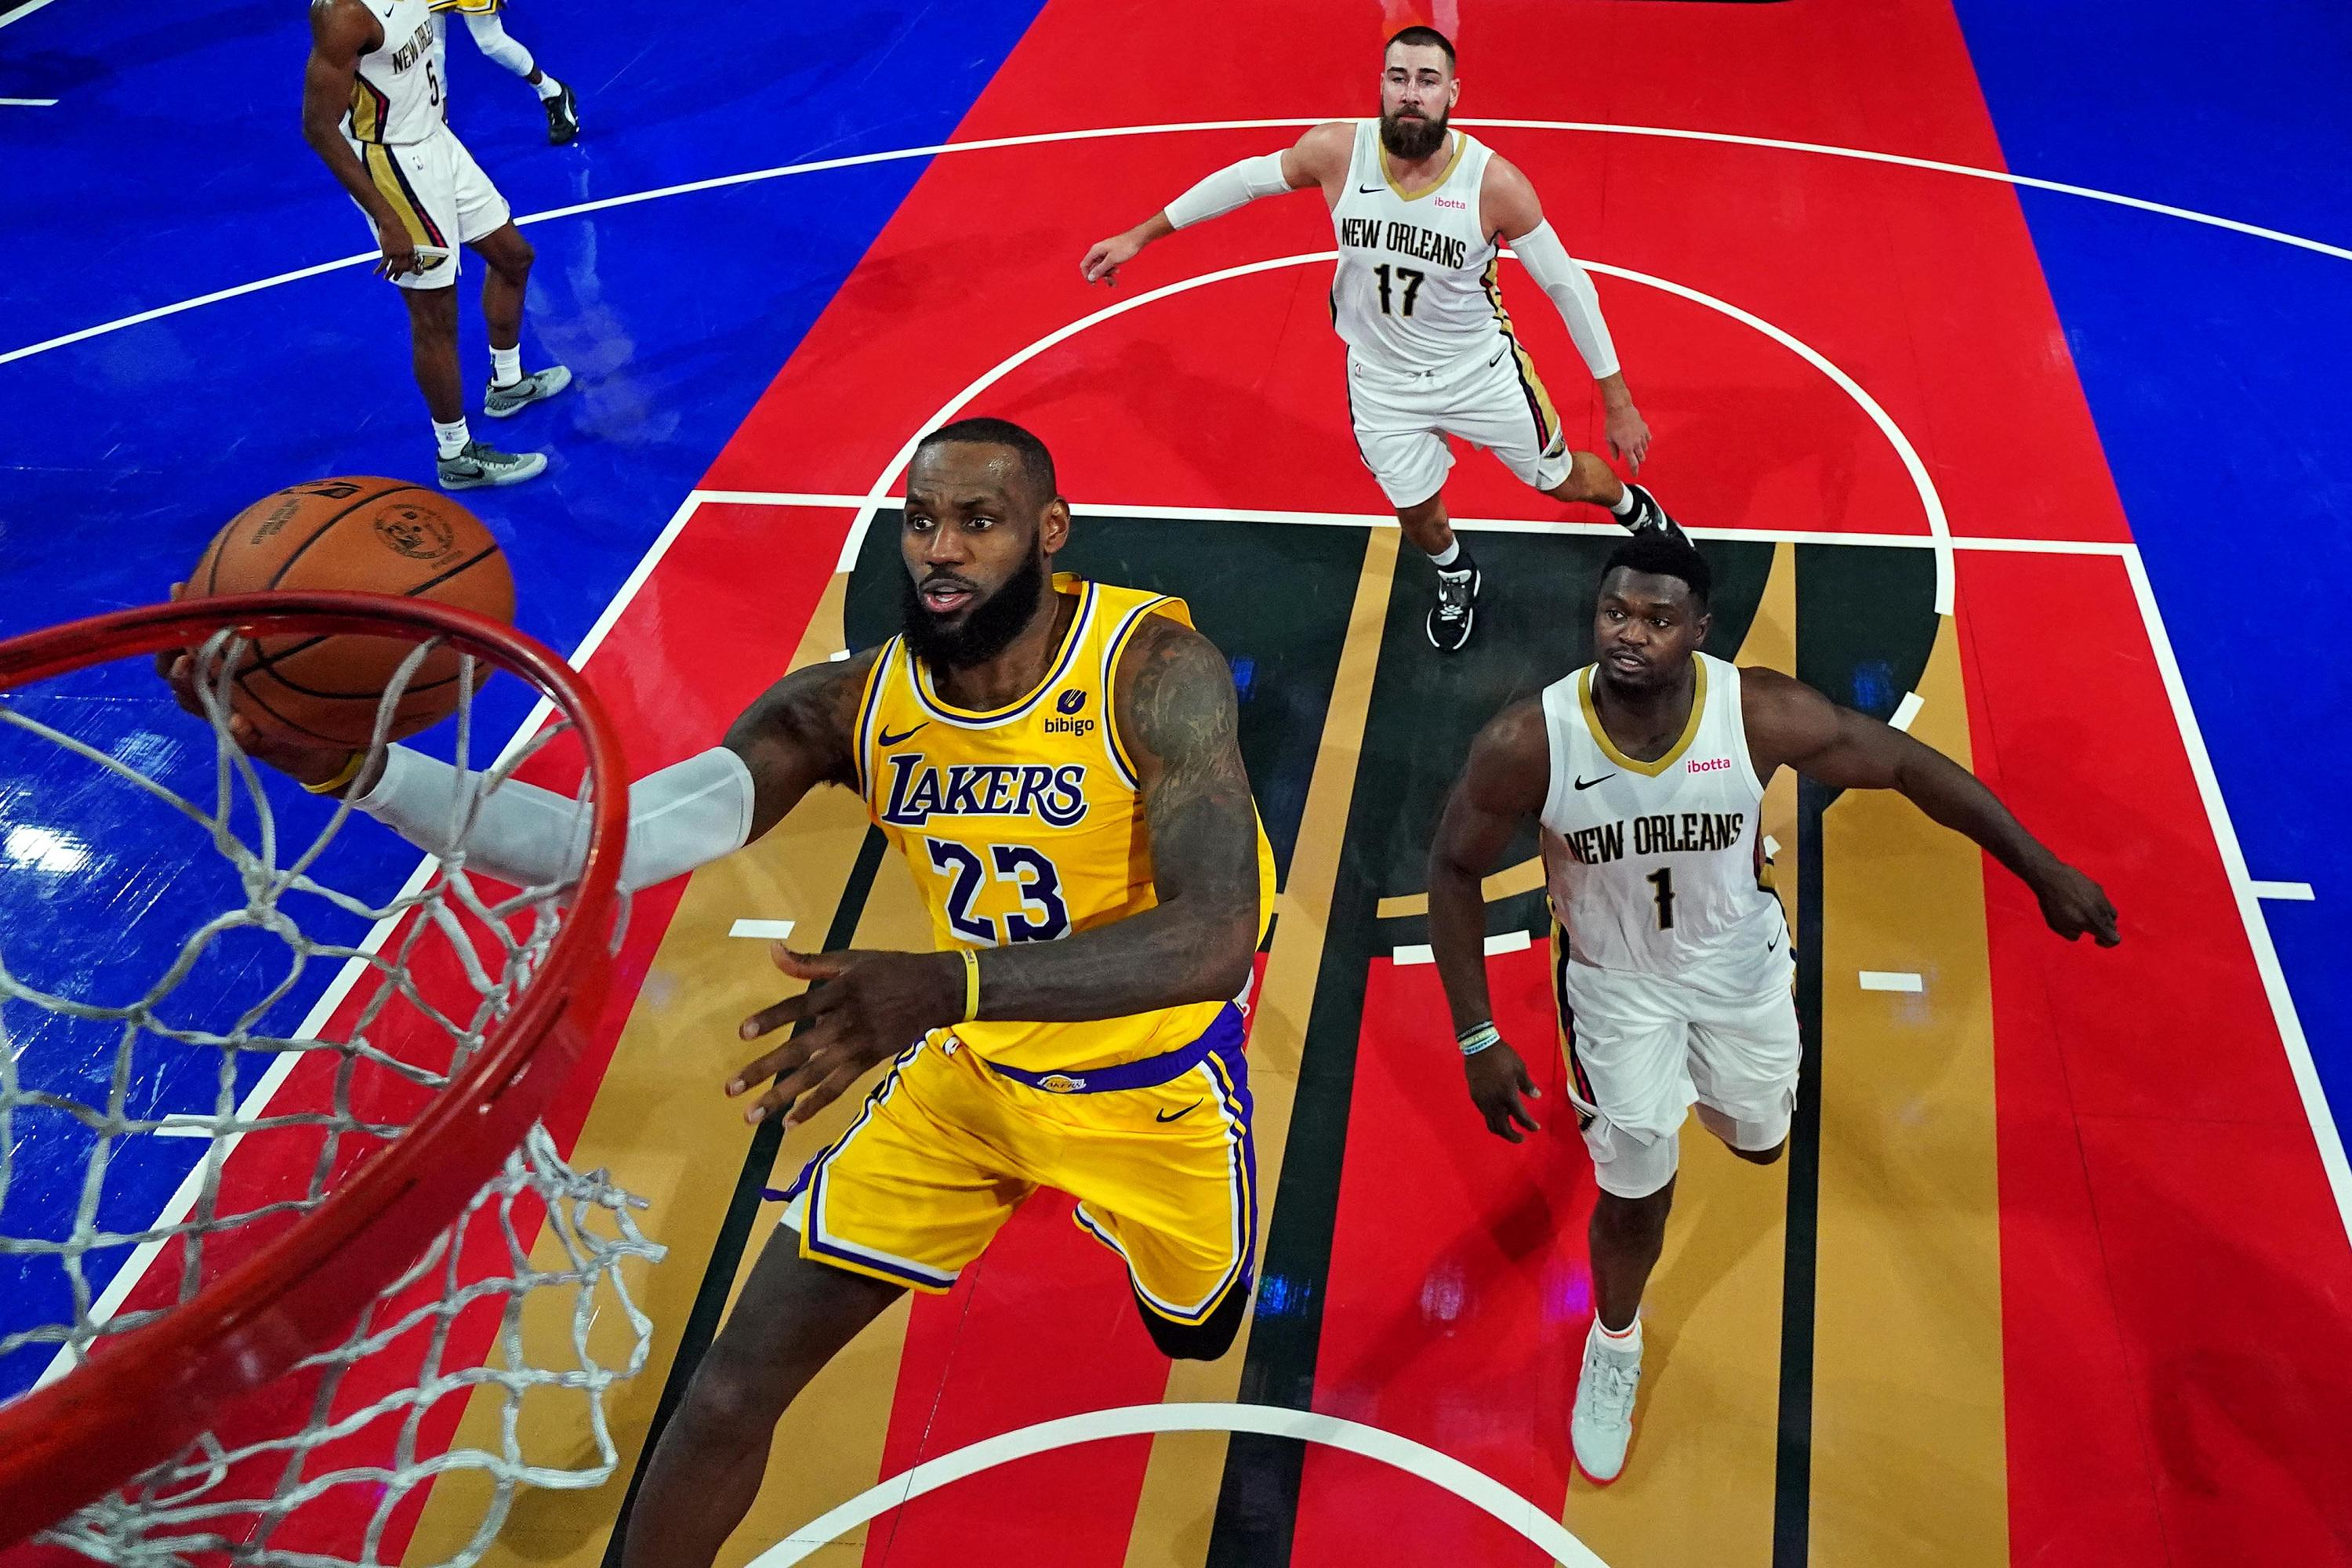 NBA Cup: almost 39 years old, the indestructible Lebron James, on a mission, defeats the Pelicans and rushes to the final